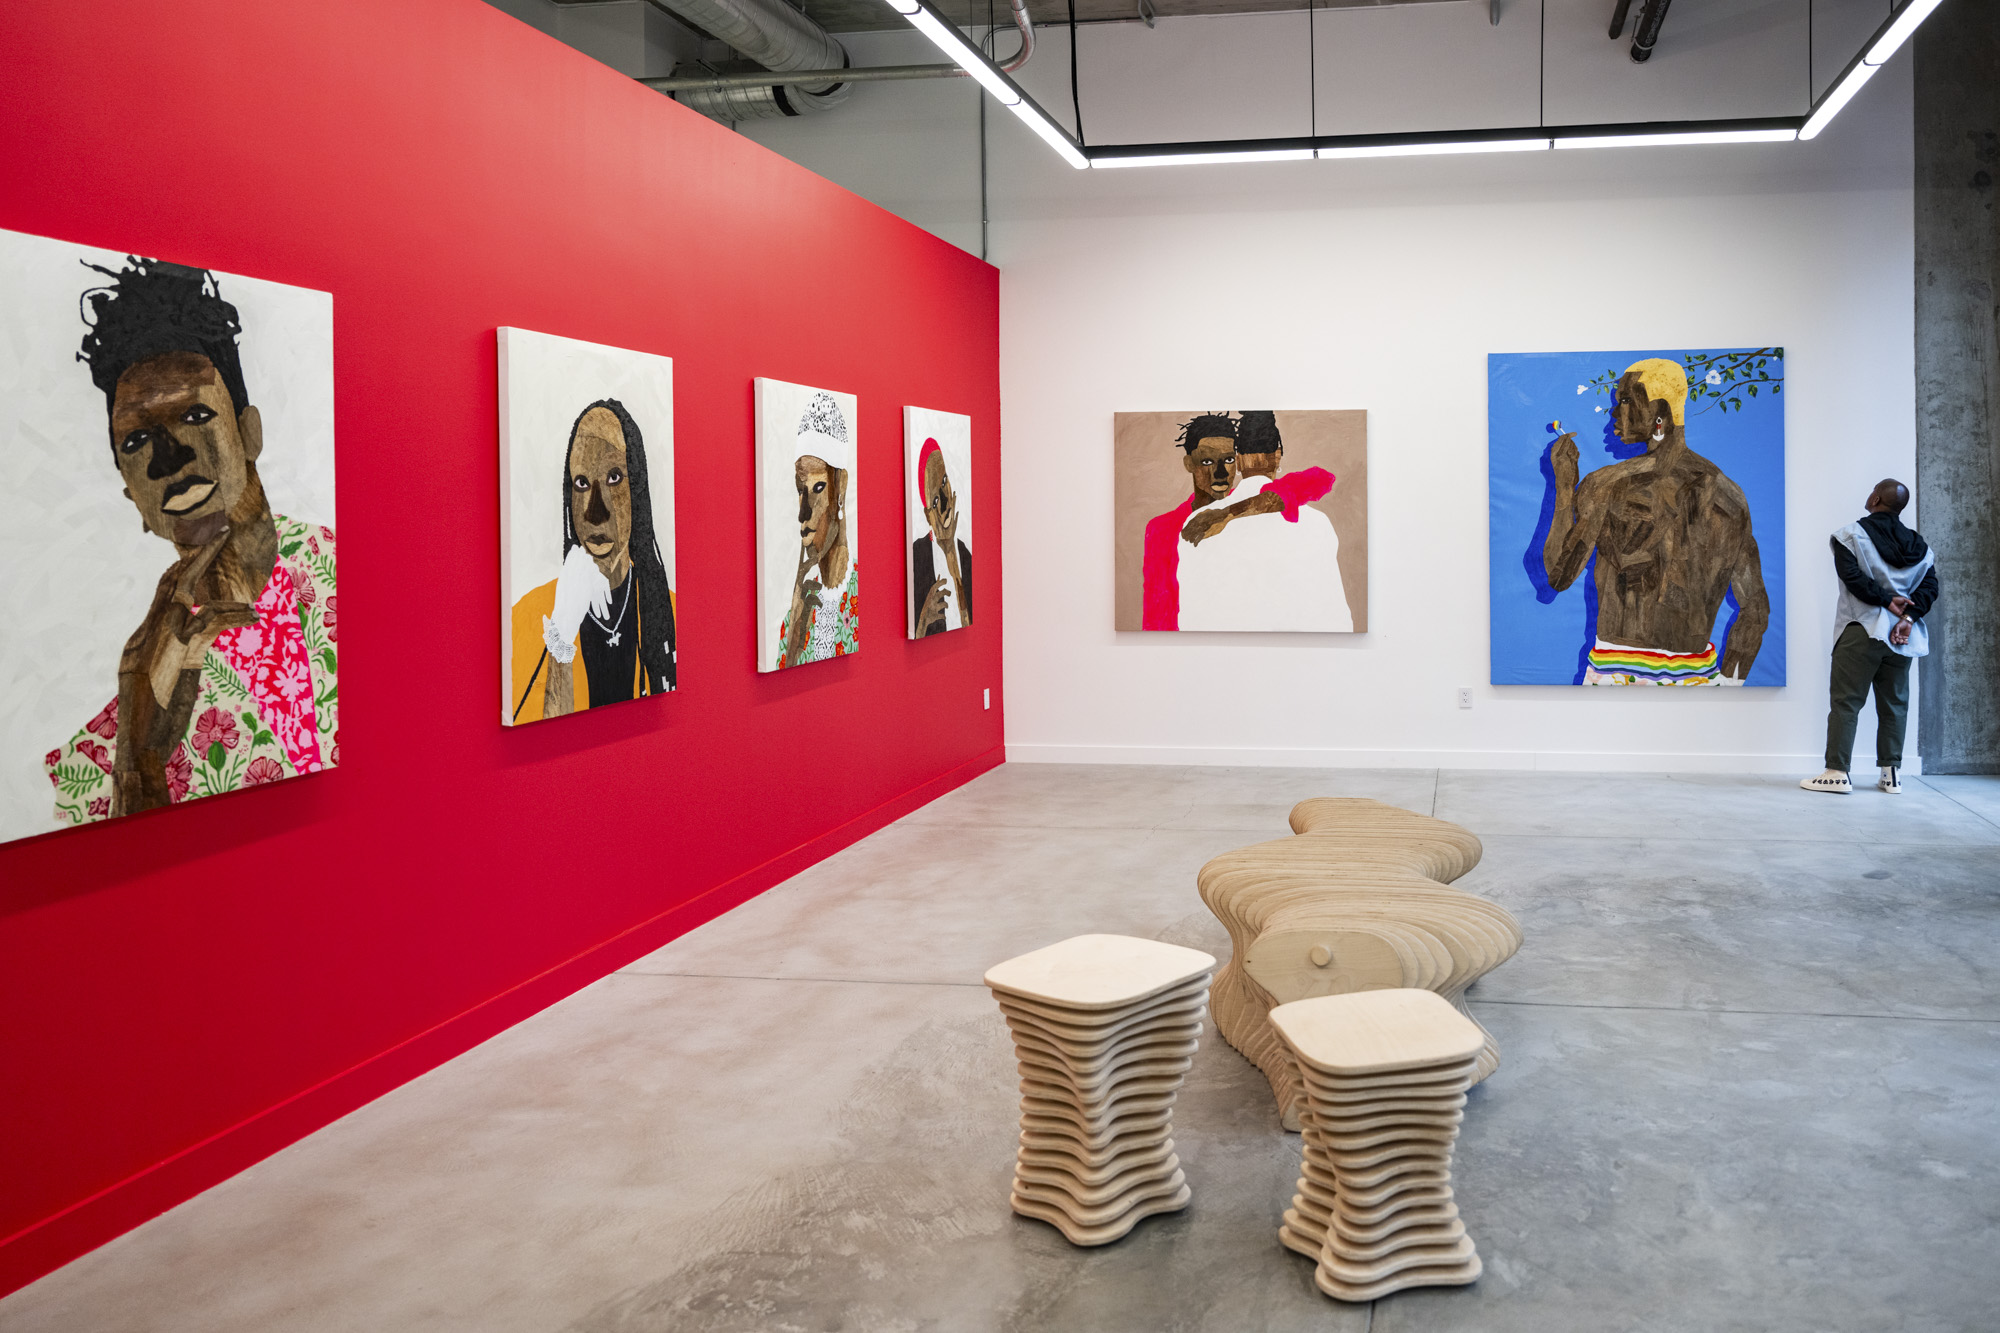 Small figure looks at large-scale portrait paintings in gallery space